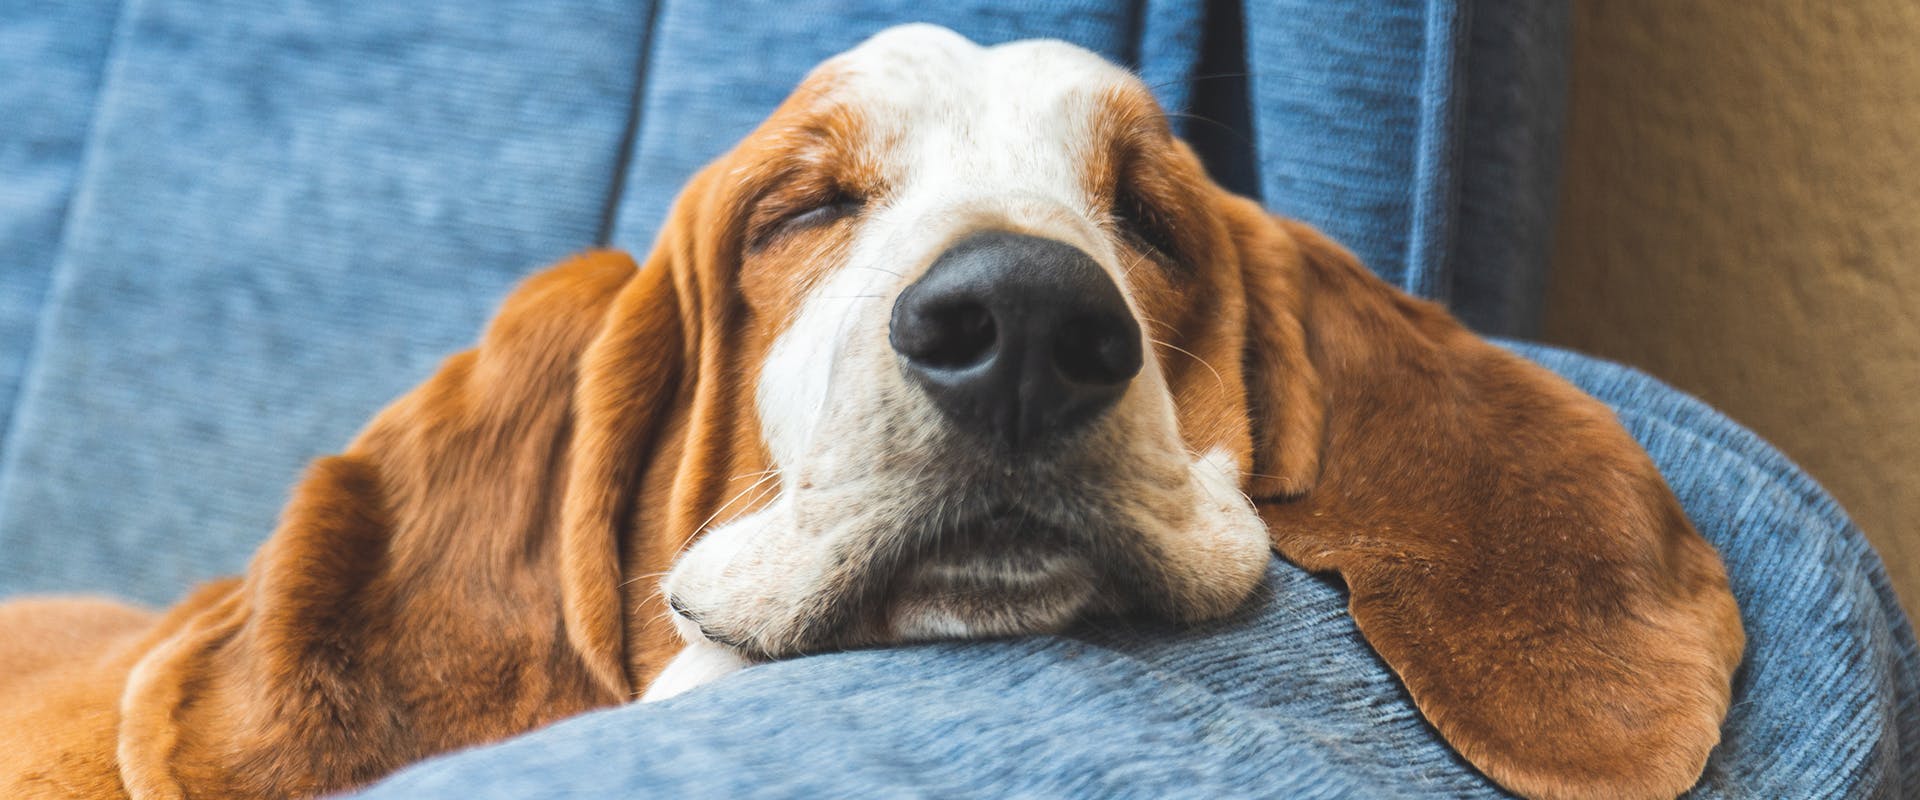 A Basset Hound puppy sleeping on the arm of a sofa